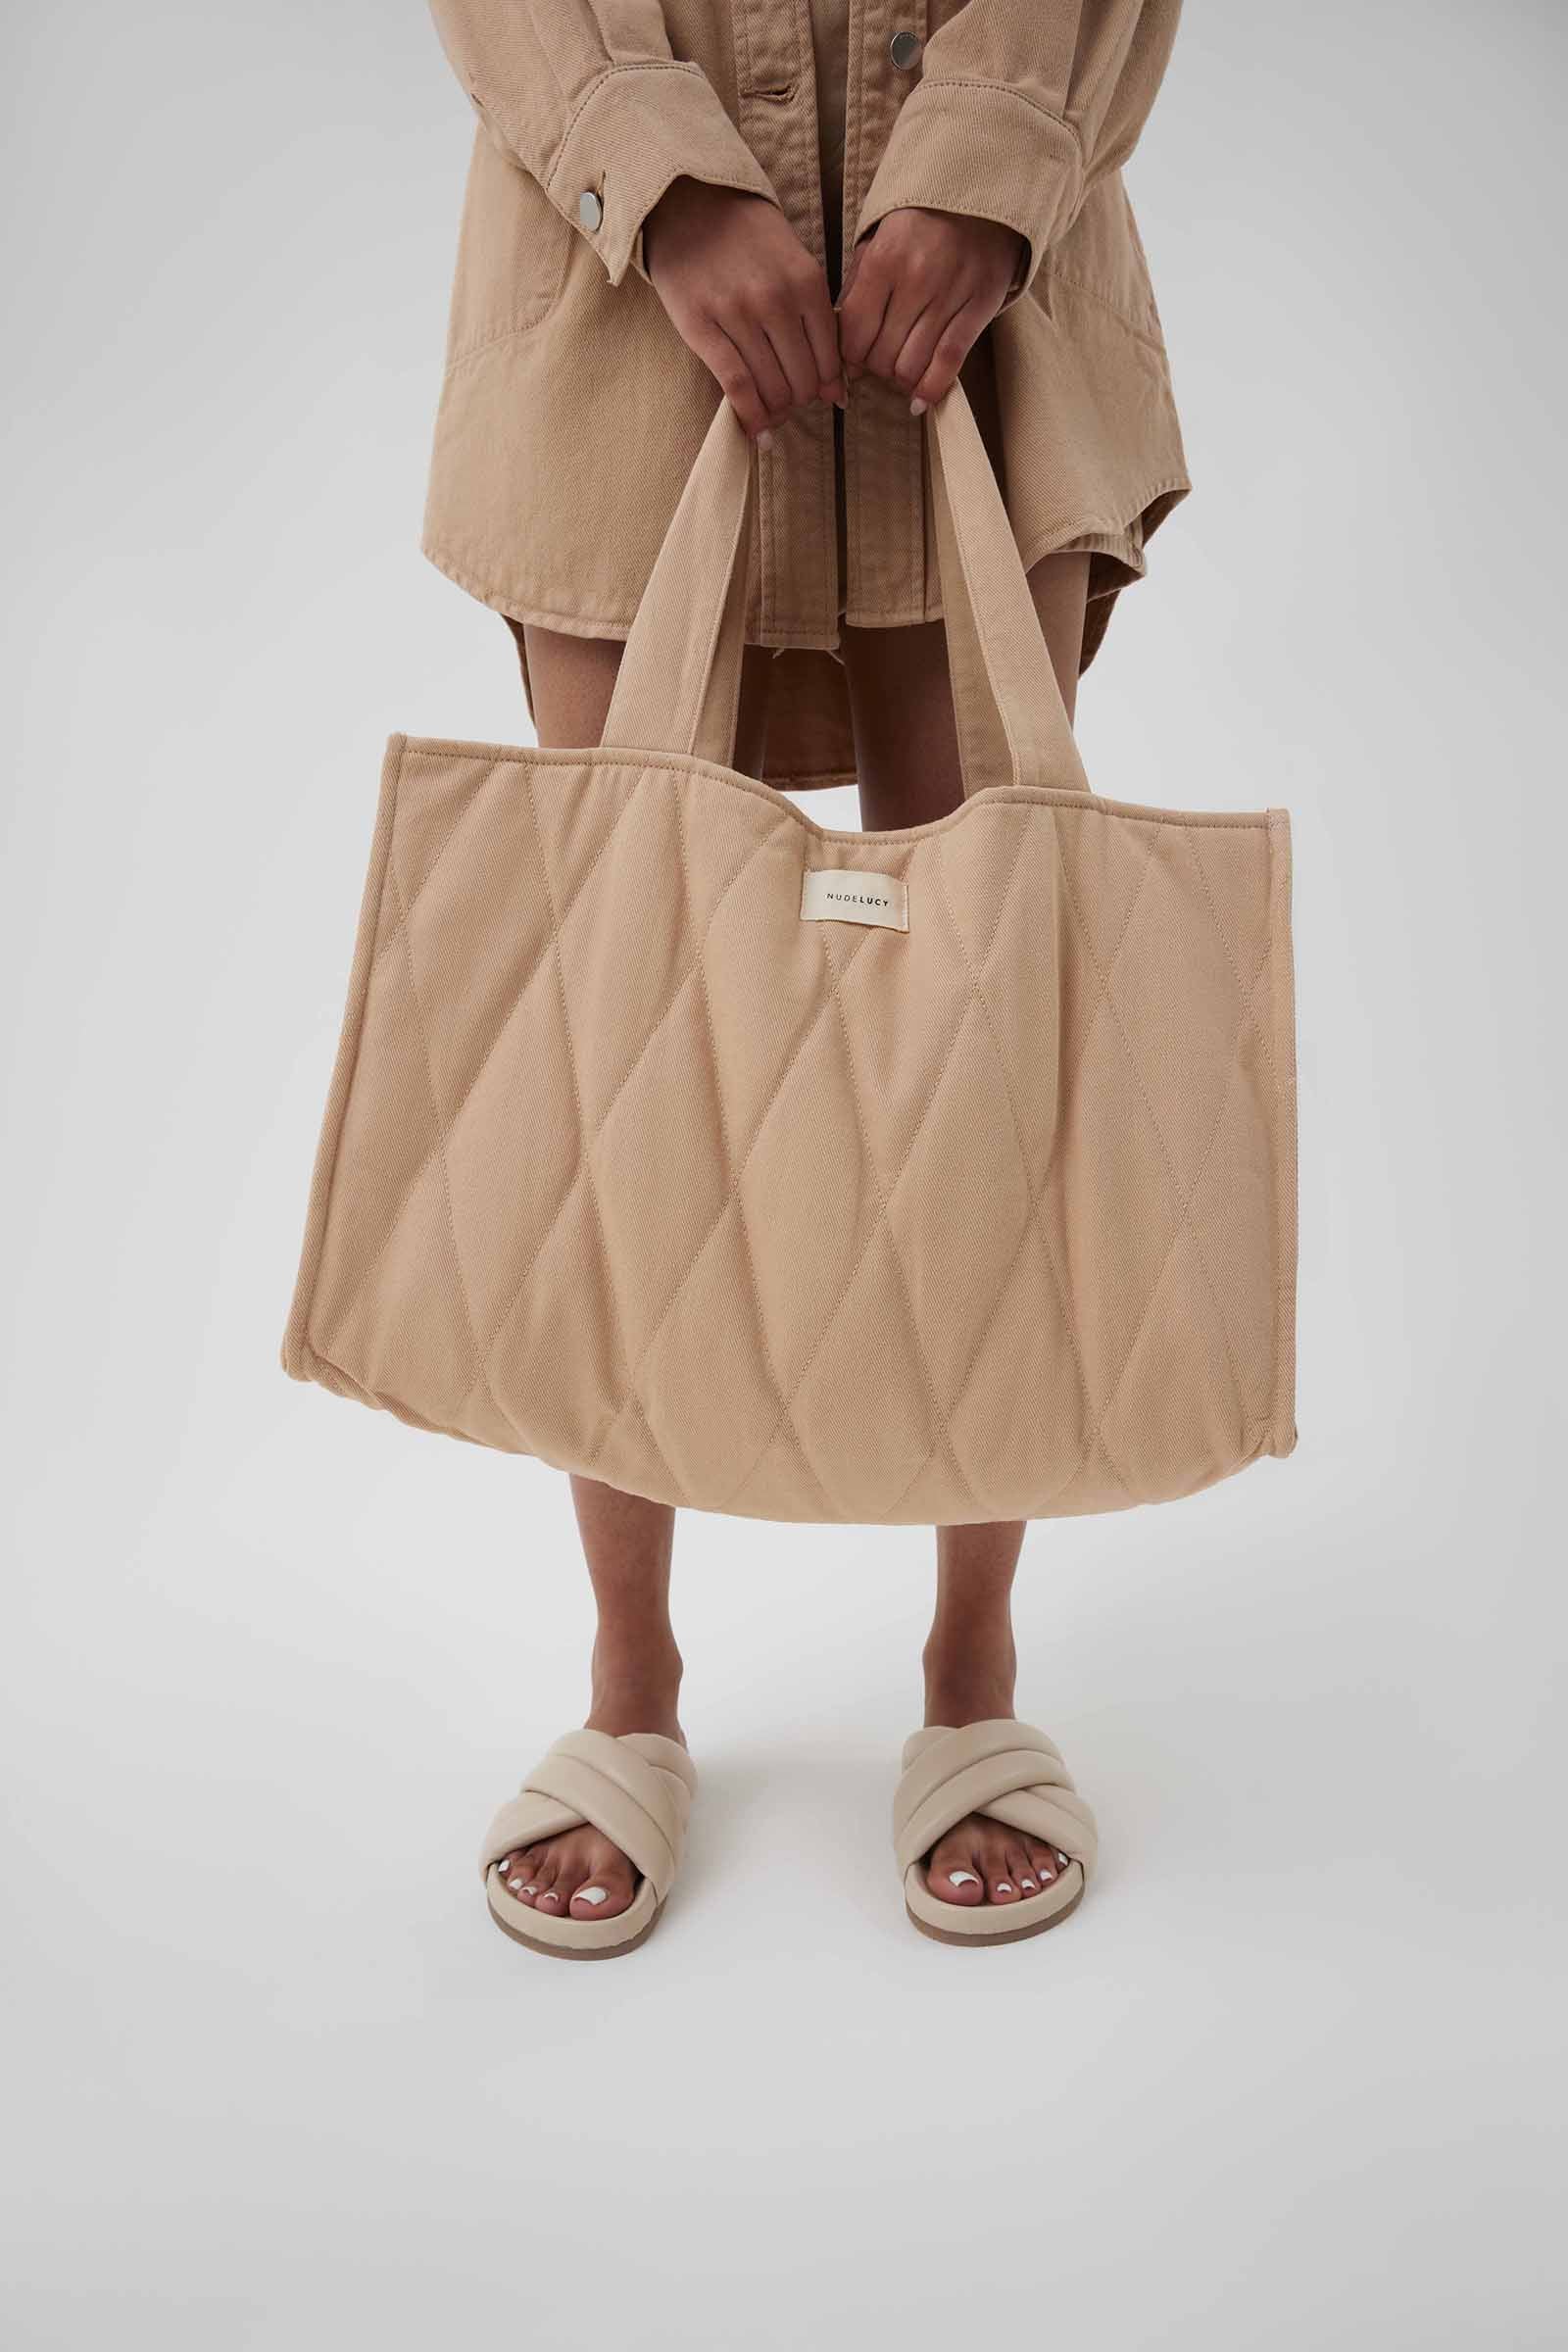 Nude Lucy Nude Puffer Bag In a Light Brown Biscuit Colour